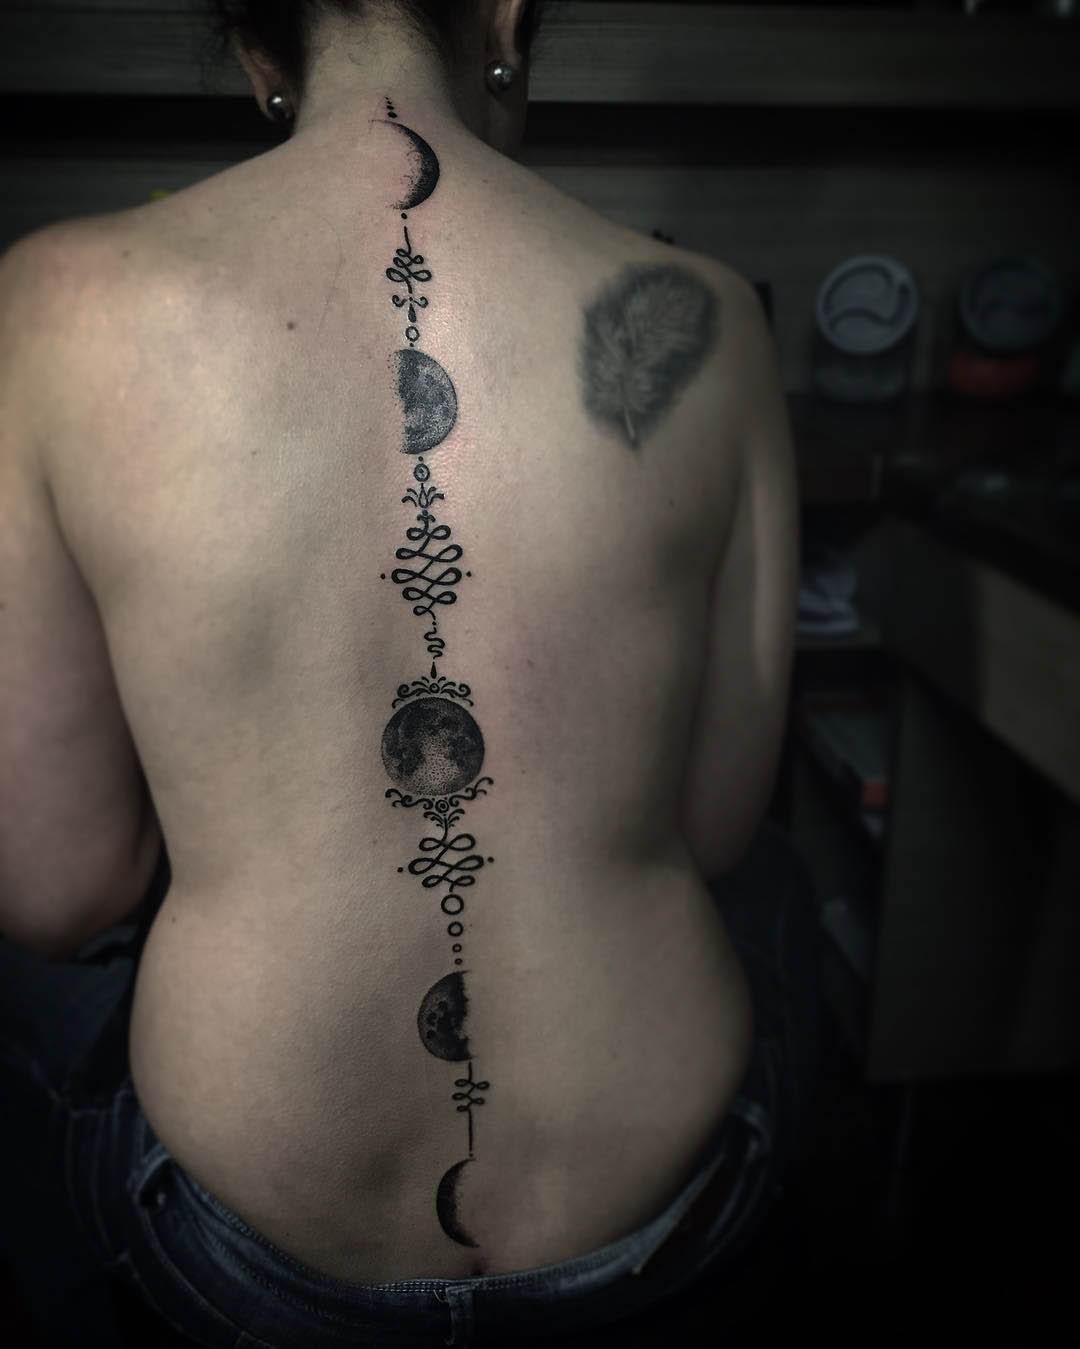 Moon Phases Tattoo on Spine by danistattoo